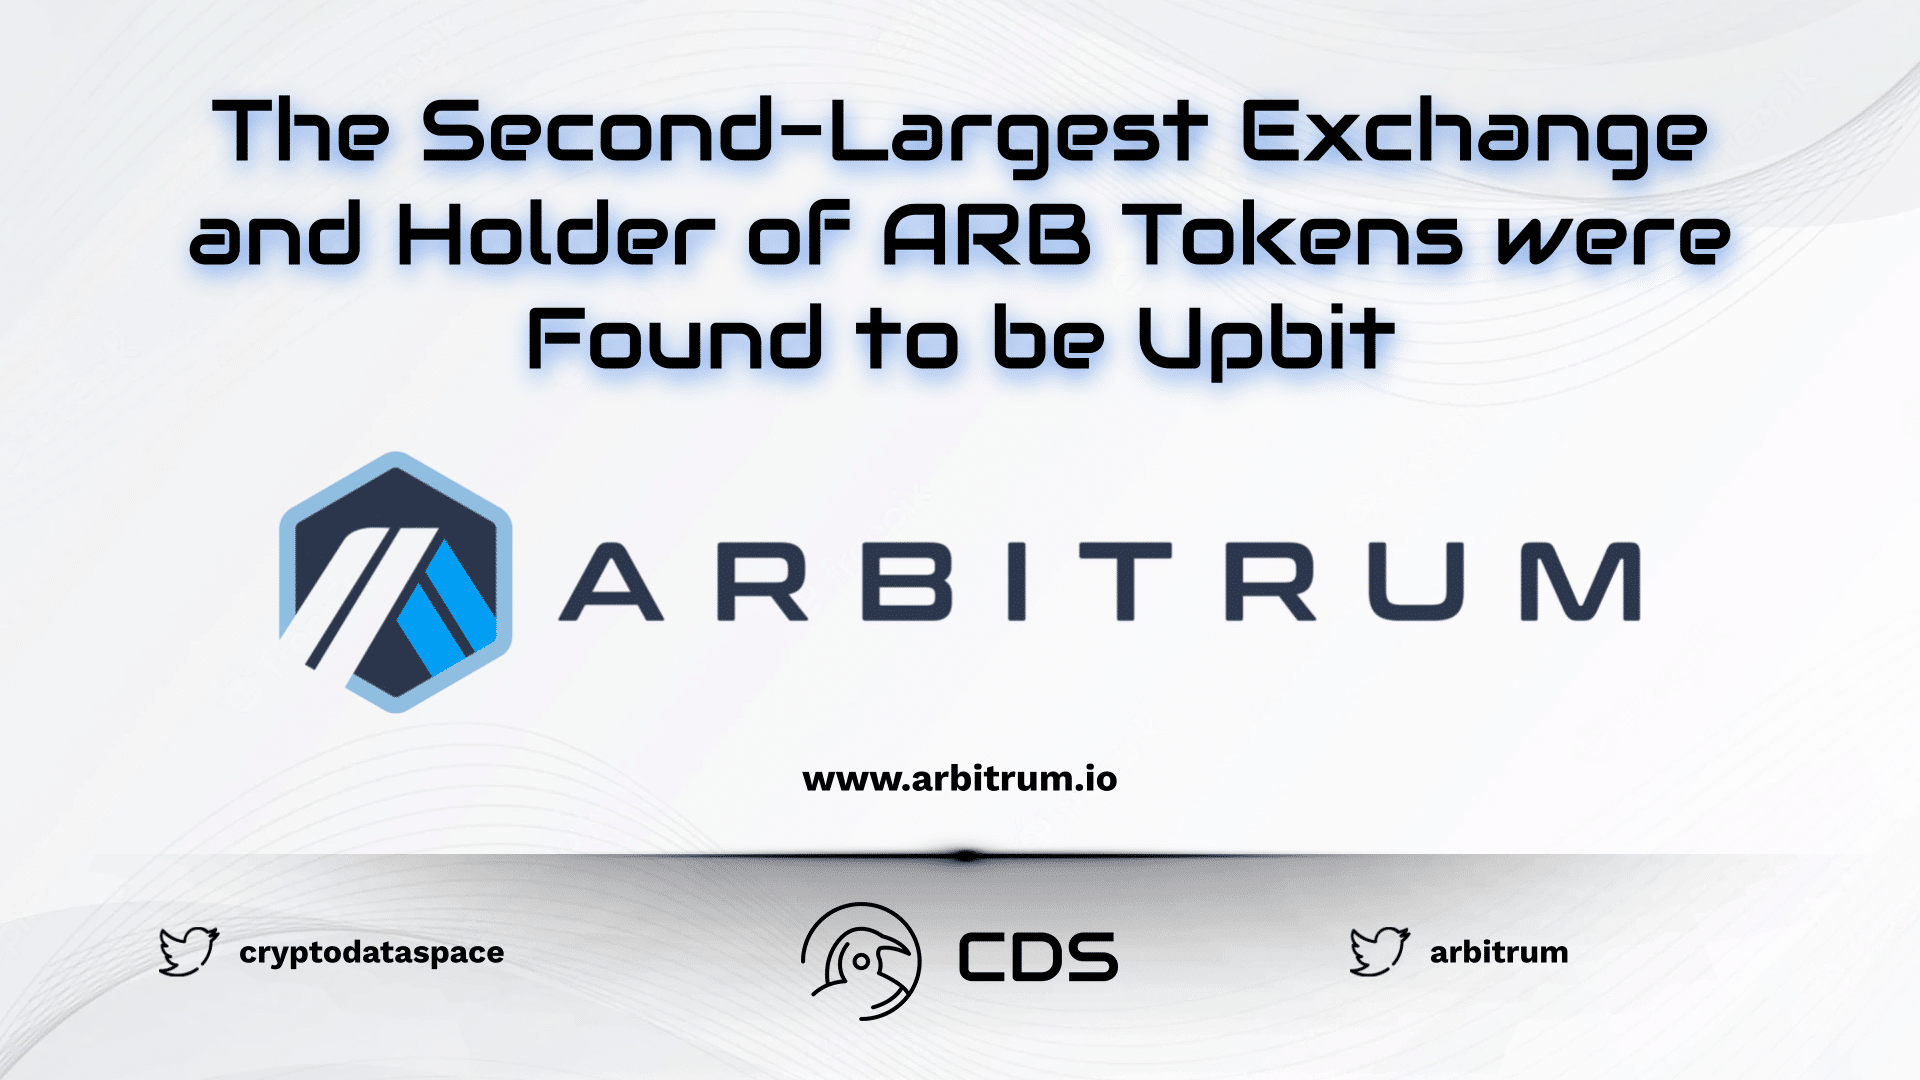 The Second-Largest Exchange and Holder of ARB Tokens were Found to be Upbit